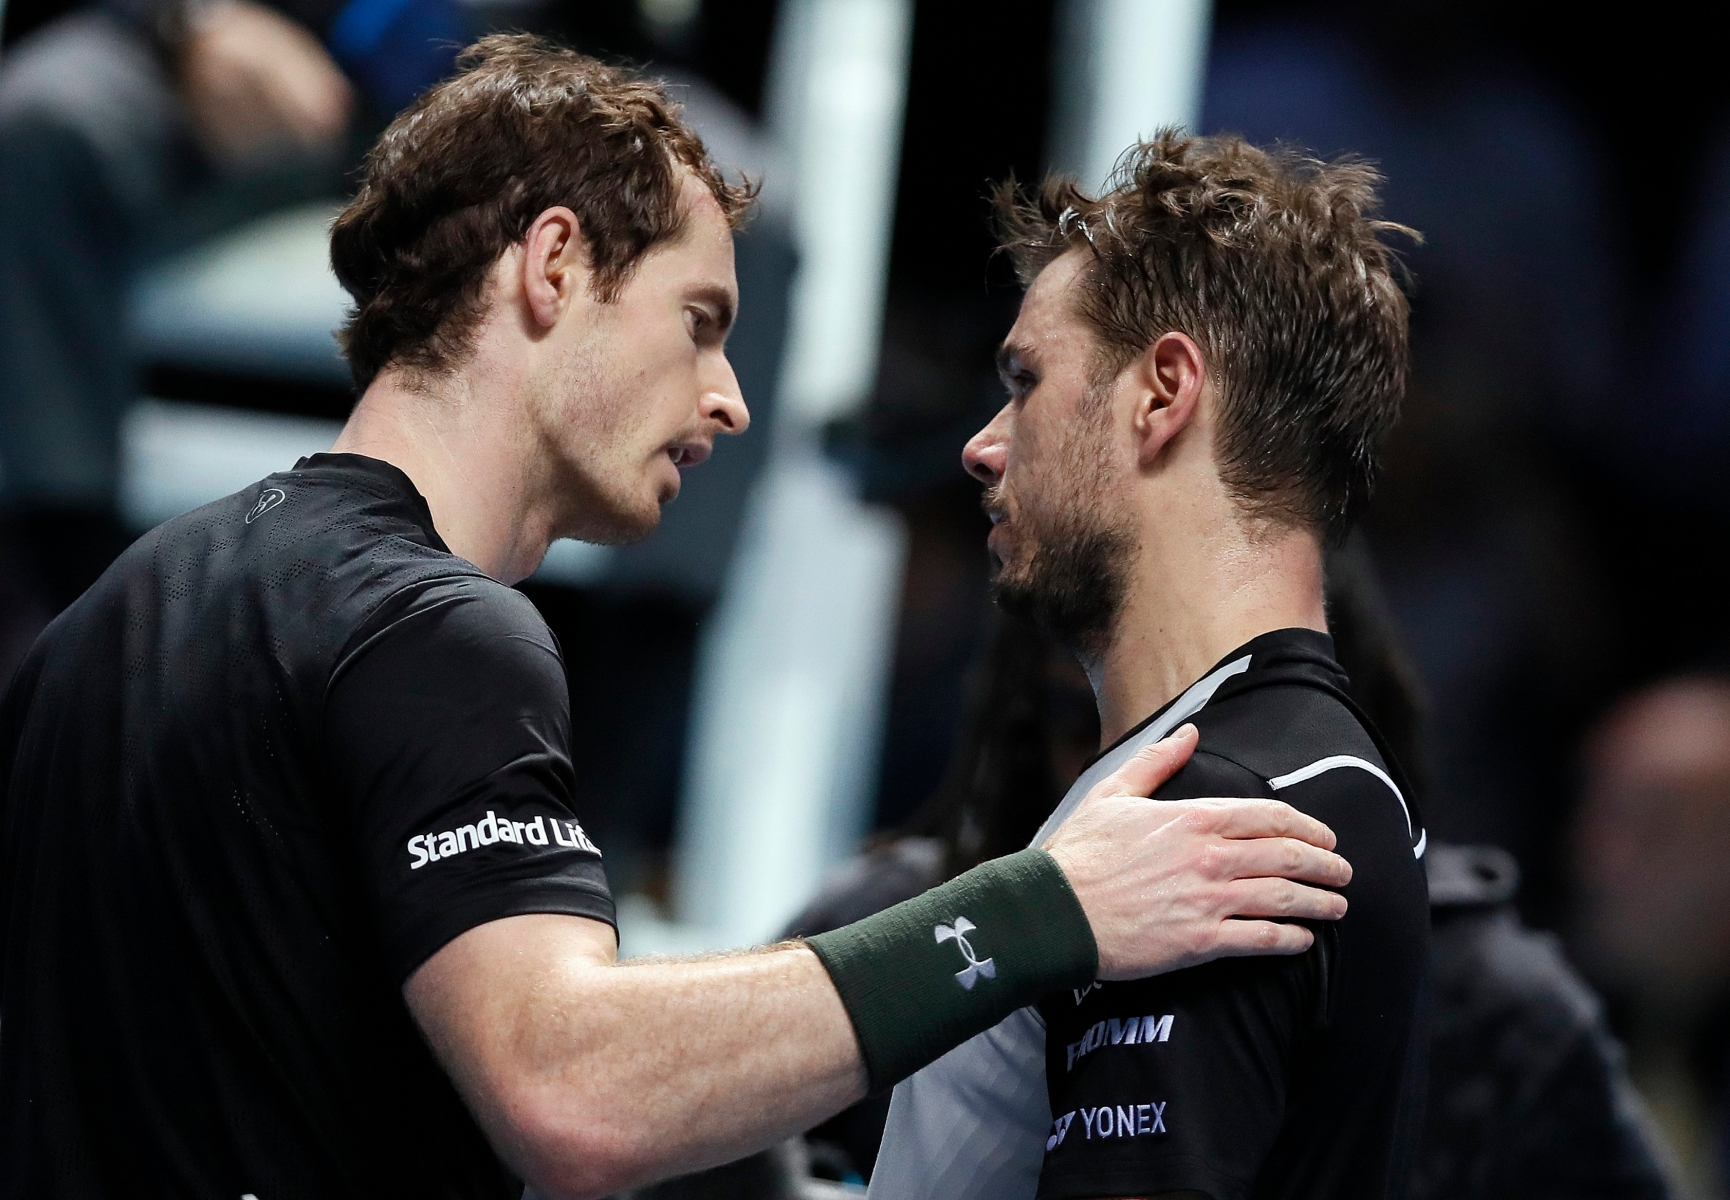 Winner Andy Murray of Britain, left, comforts Stan Wawrinka of Switzerland after their ATP World Tour Finals singles tennis match at the O2 Arena in London, Friday, Nov. 18, 2016. (AP Photo/Kirsty Wigglesworth) Britain Tennis ATP Finals